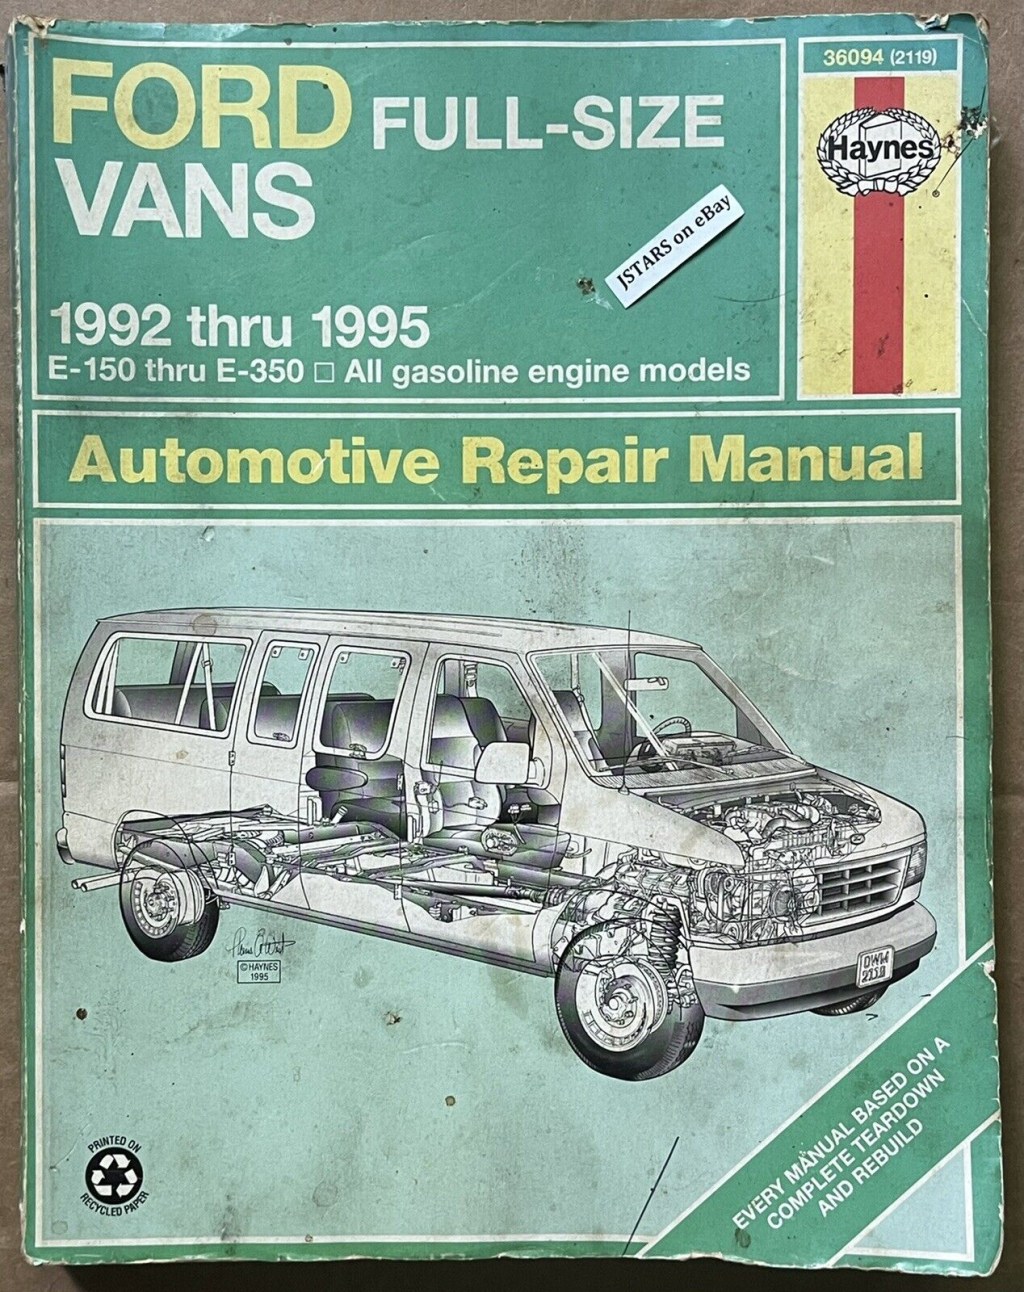 Picture of: FORD VAN E E E REPAIR MANUAL by HAYNES